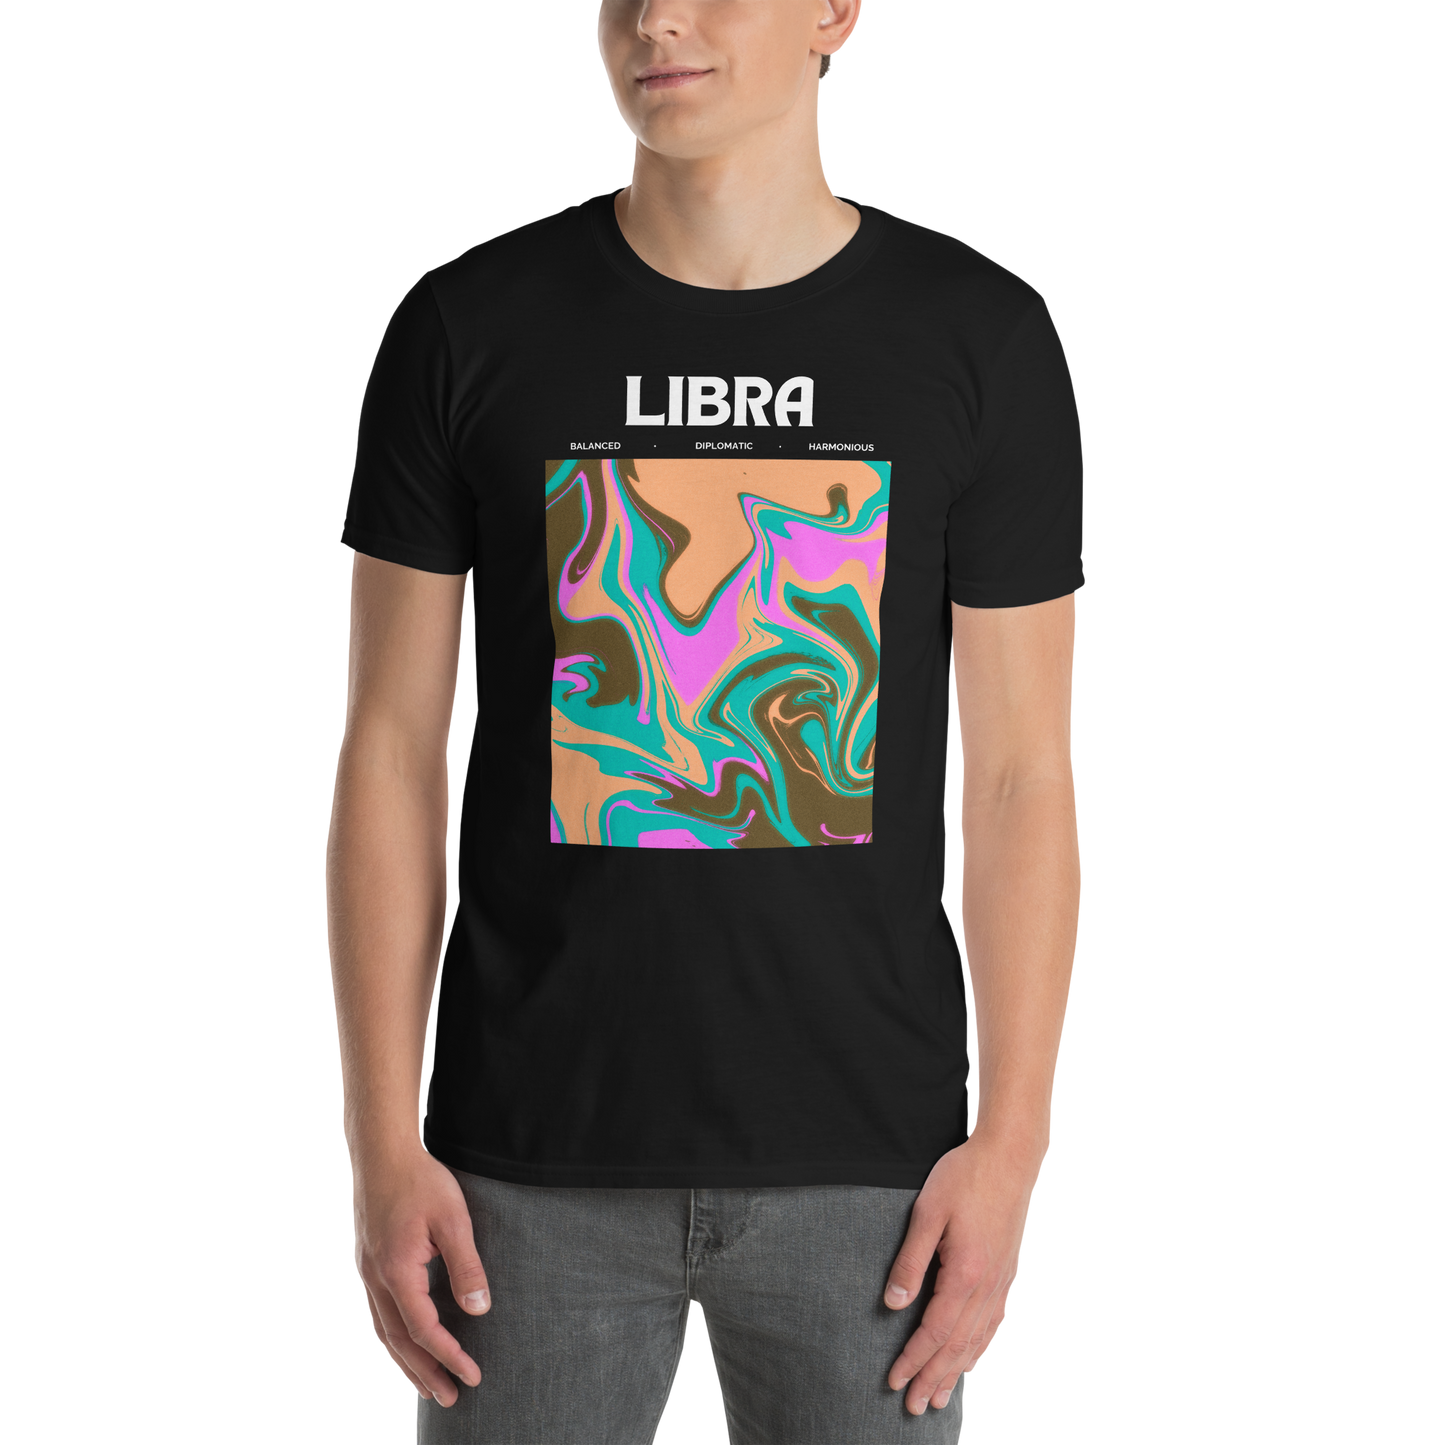 Man wearing a Black Libra T-Shirt featuring an Abstract Libra Star Sign graphic on the chest - Cool Graphic Zodiac T-Shirts - Boozy Fox